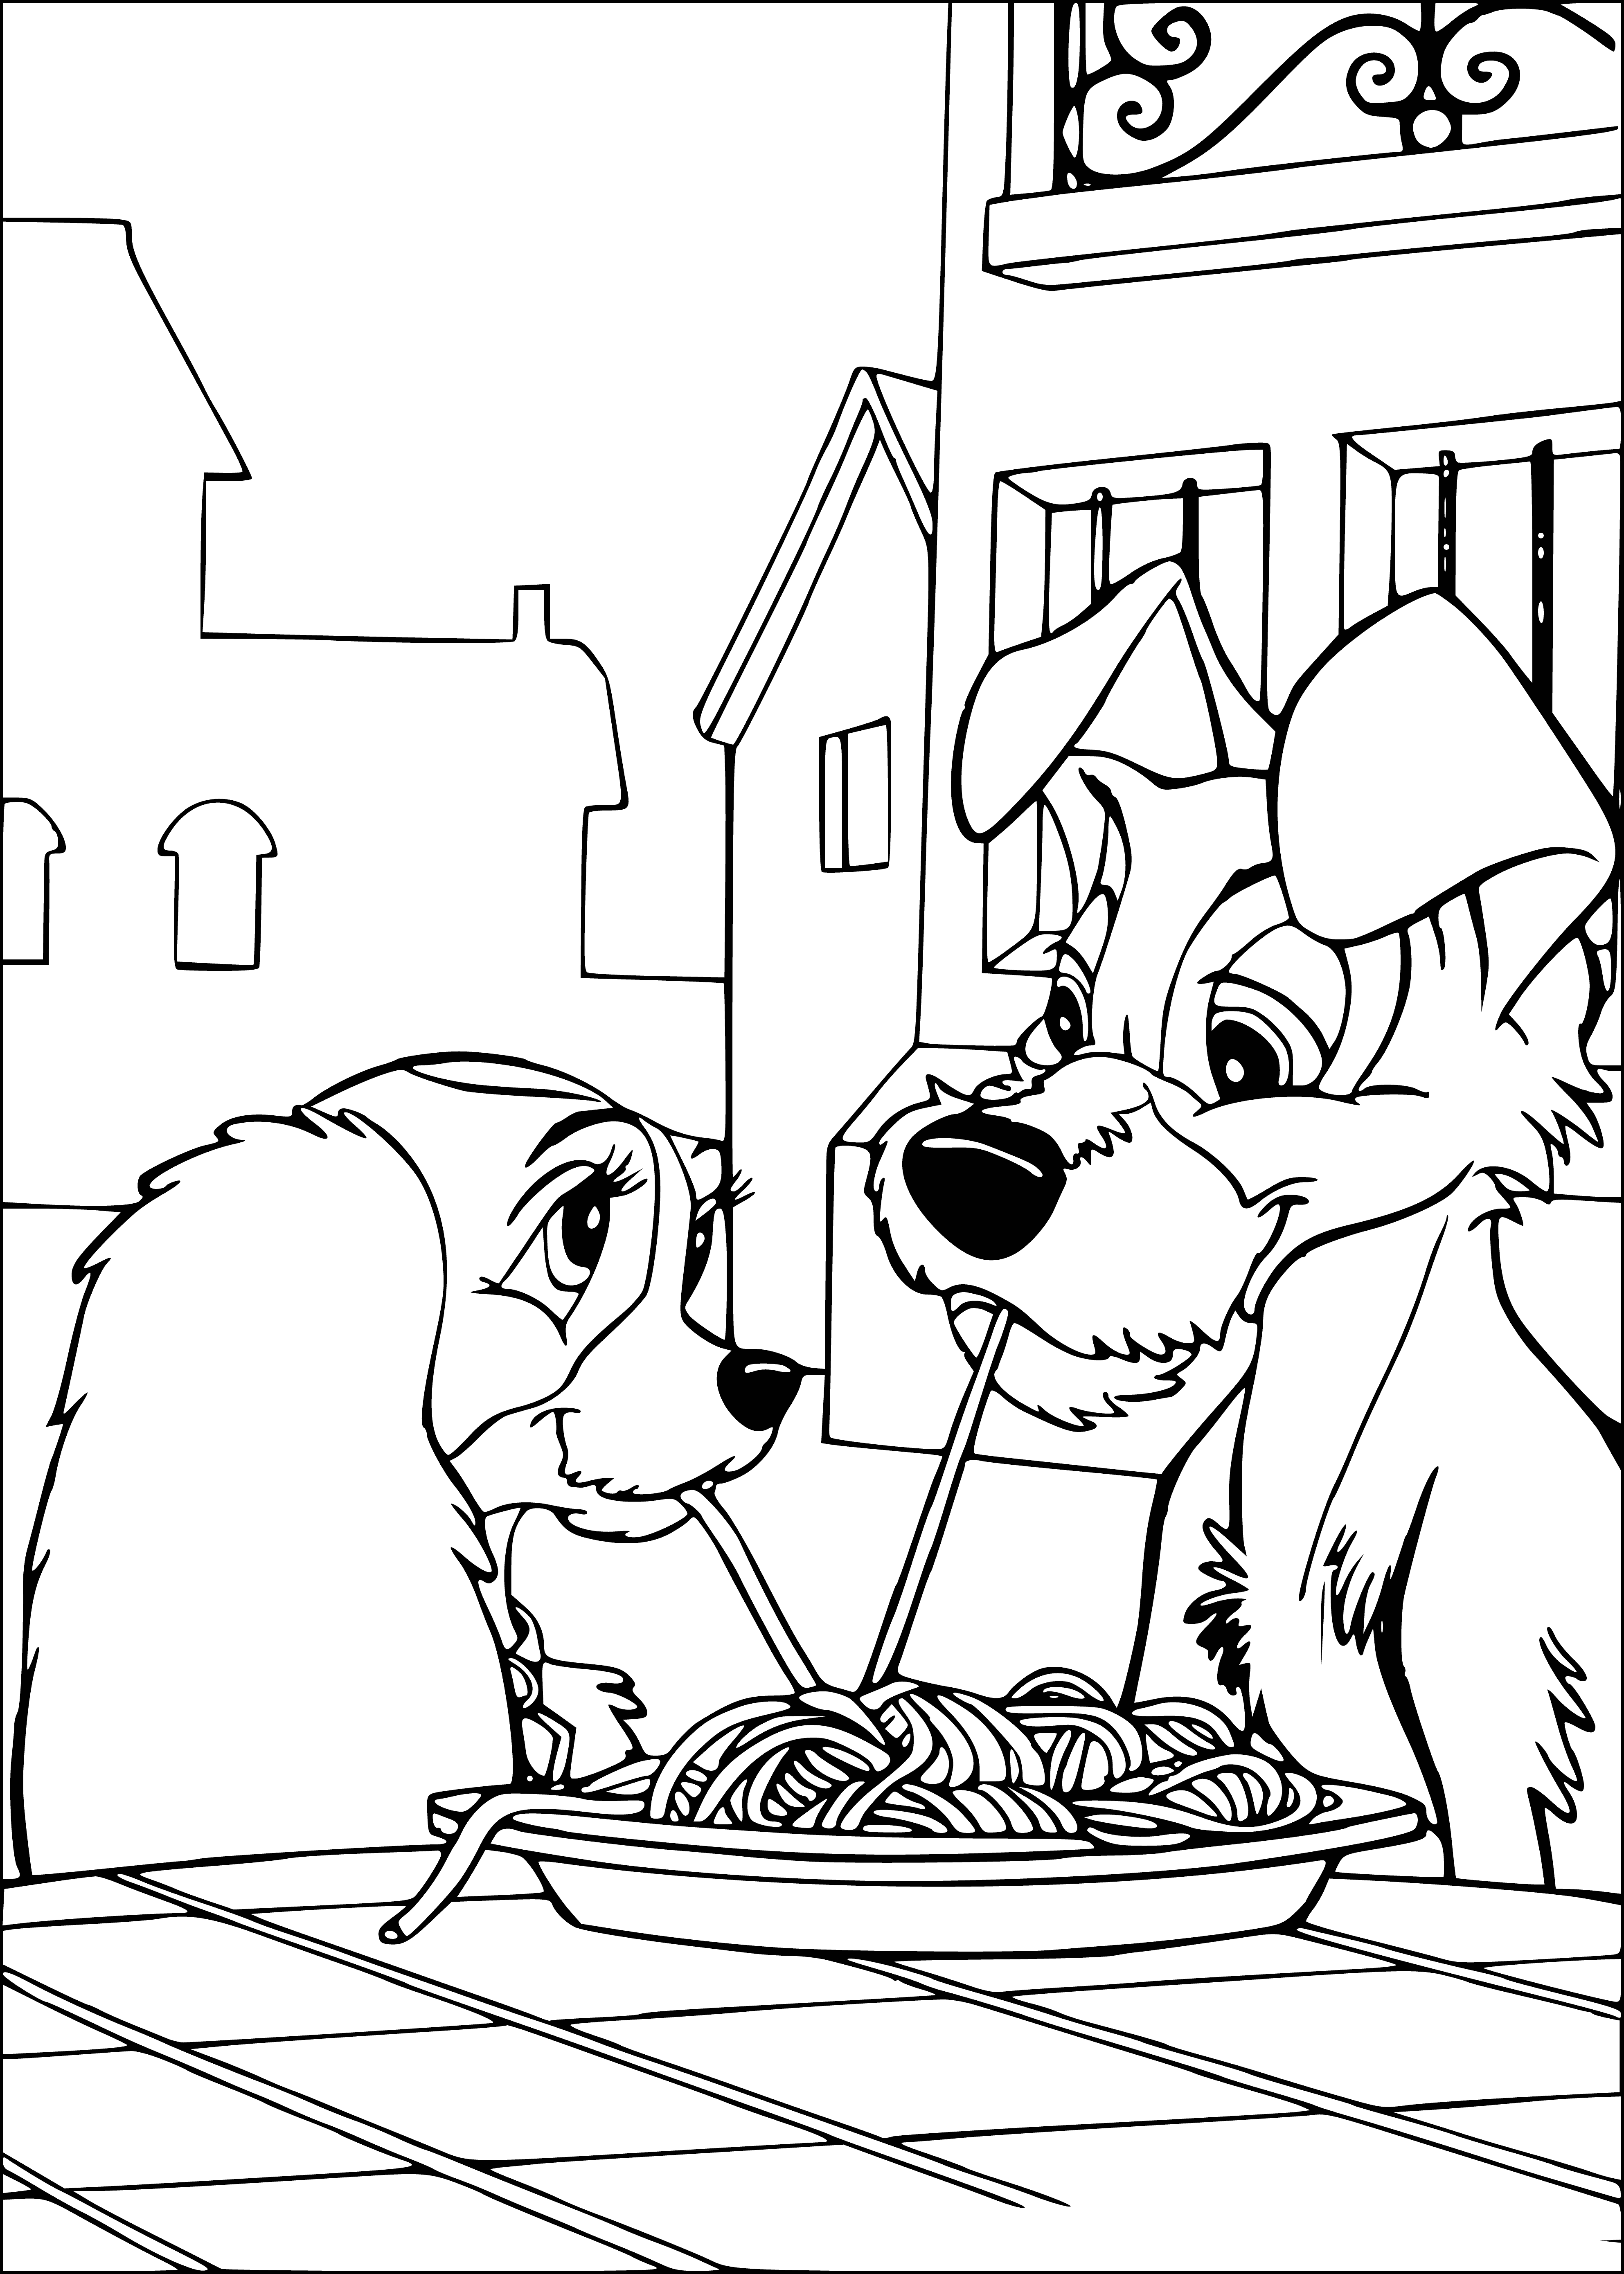 coloring page: Lady and the Tramp are having a playful moment, with the rat standing on the dog's head and the beige pup with its tongue out.